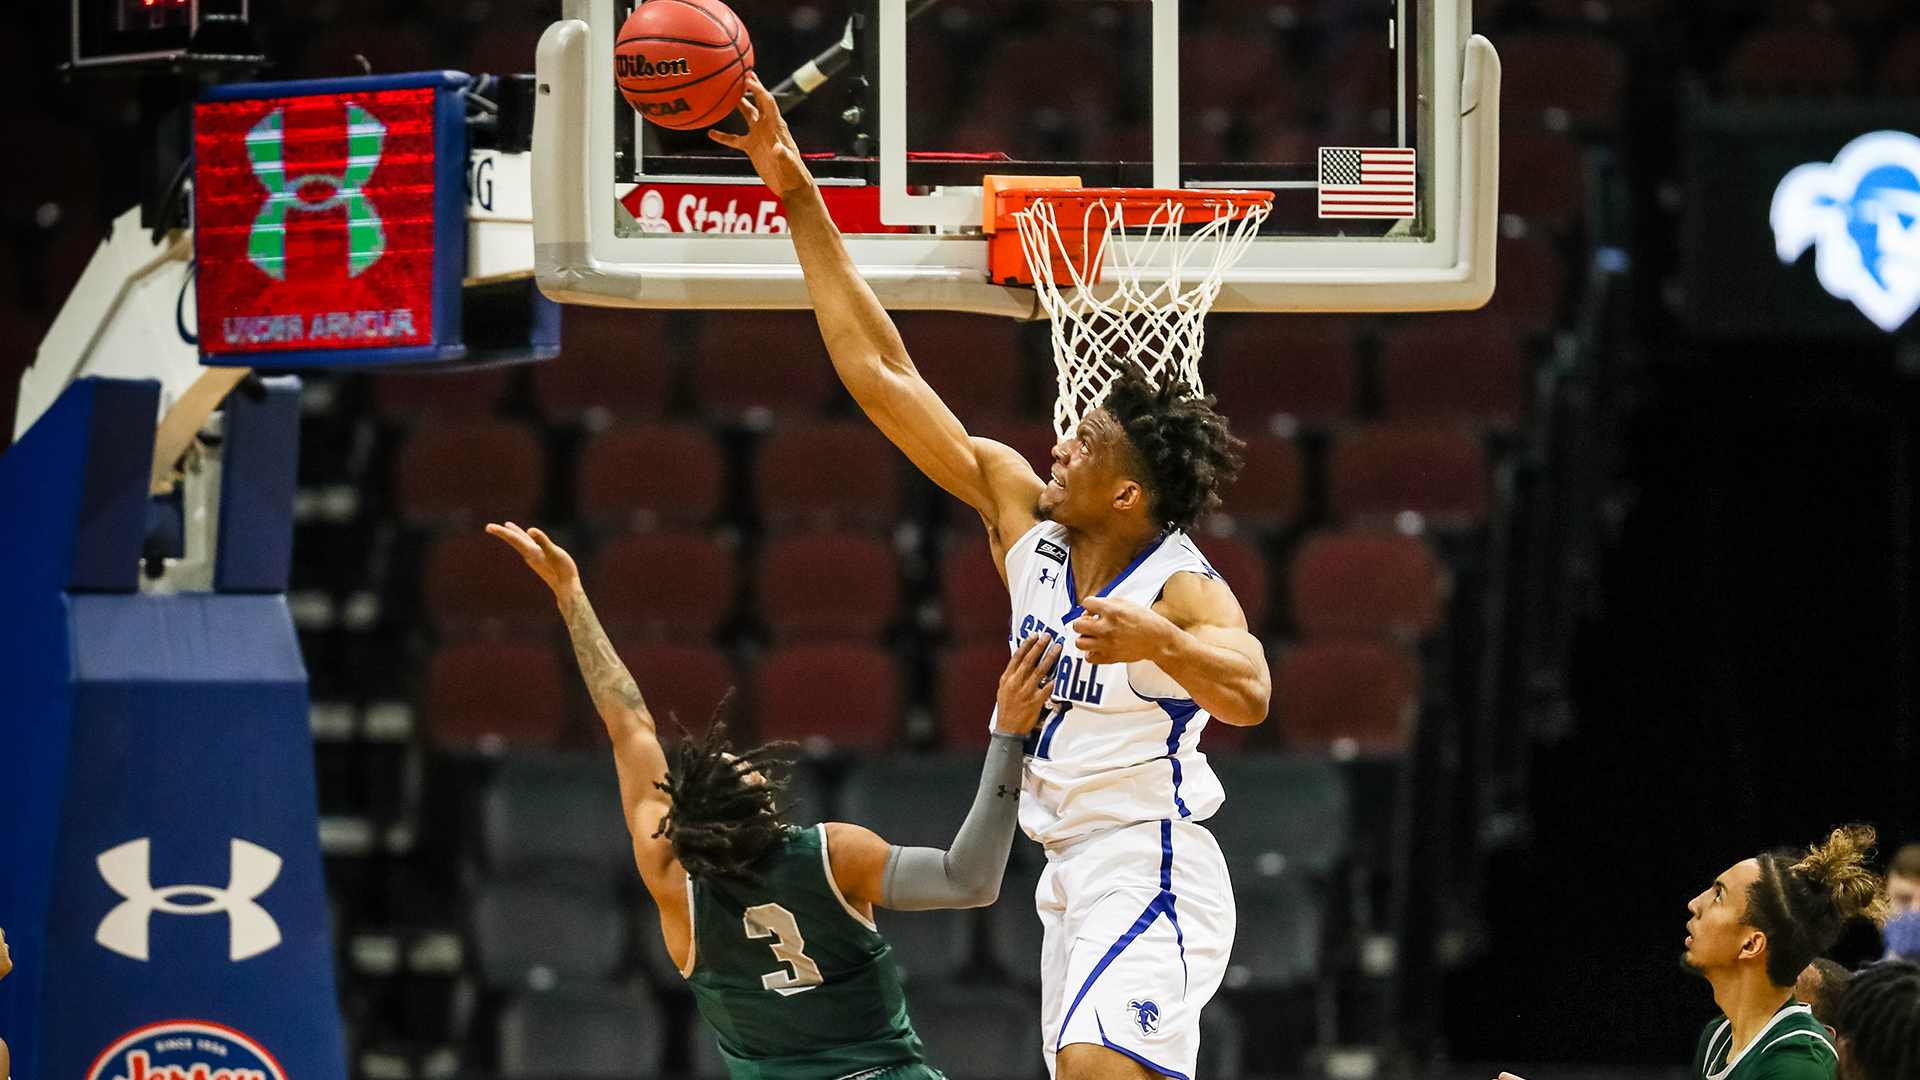 Ike Obiagu tries to block his opponent during a Seton Hall men's basketball game.